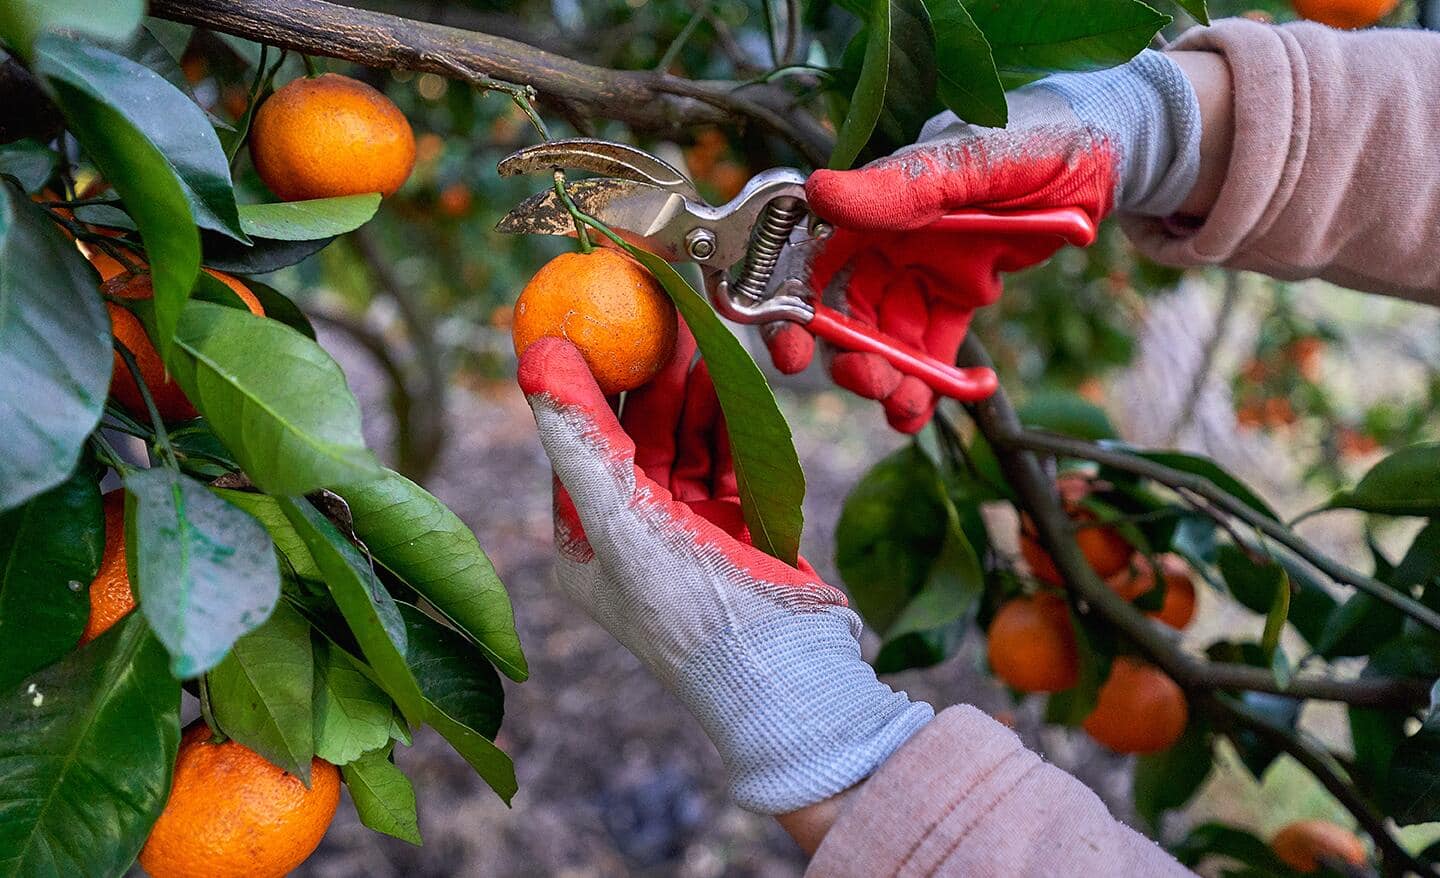 Gardener uses pruners to snip fruit from a tree